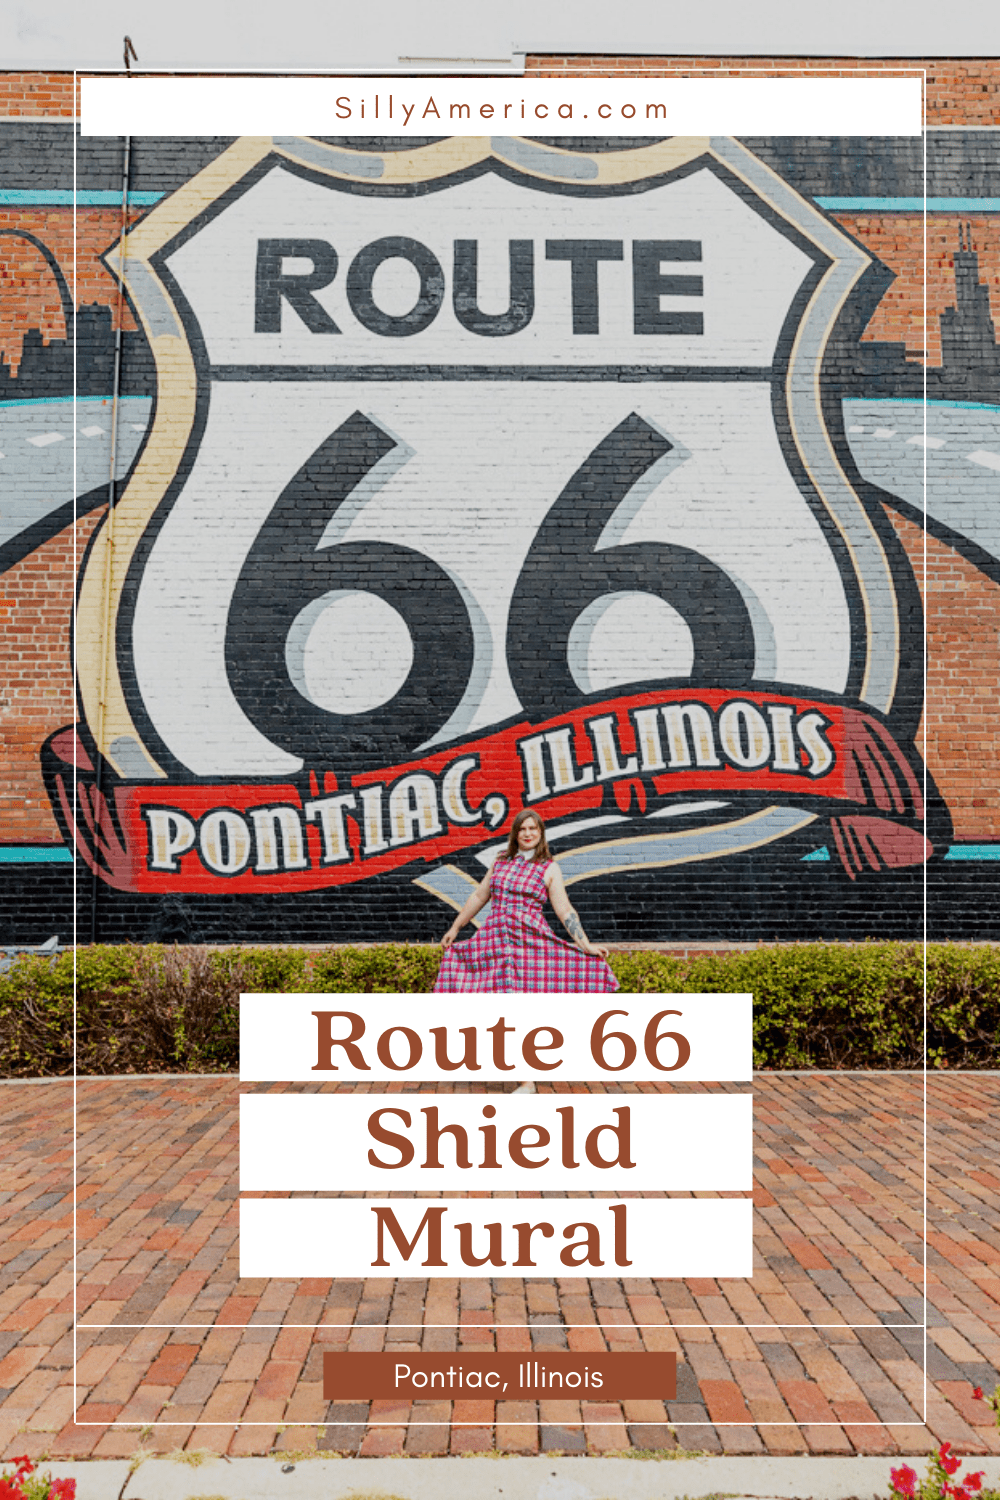 They say go big or go home. And this Route 66 stop is BIG: the Route 66 Shield Mural in Pontiac, Illinois is one of the most photographed murals on the Mother Road.  #RoadTrips #RoadTripStop #Route66 #Route66RoadTrip #IllinoisRoute66 #Illinois #IllinoisRoadTrip #IllinoisRoadsideAttractions #RoadsideAttractions #RoadsideAttraction #RoadsideAmerica #RoadTrip